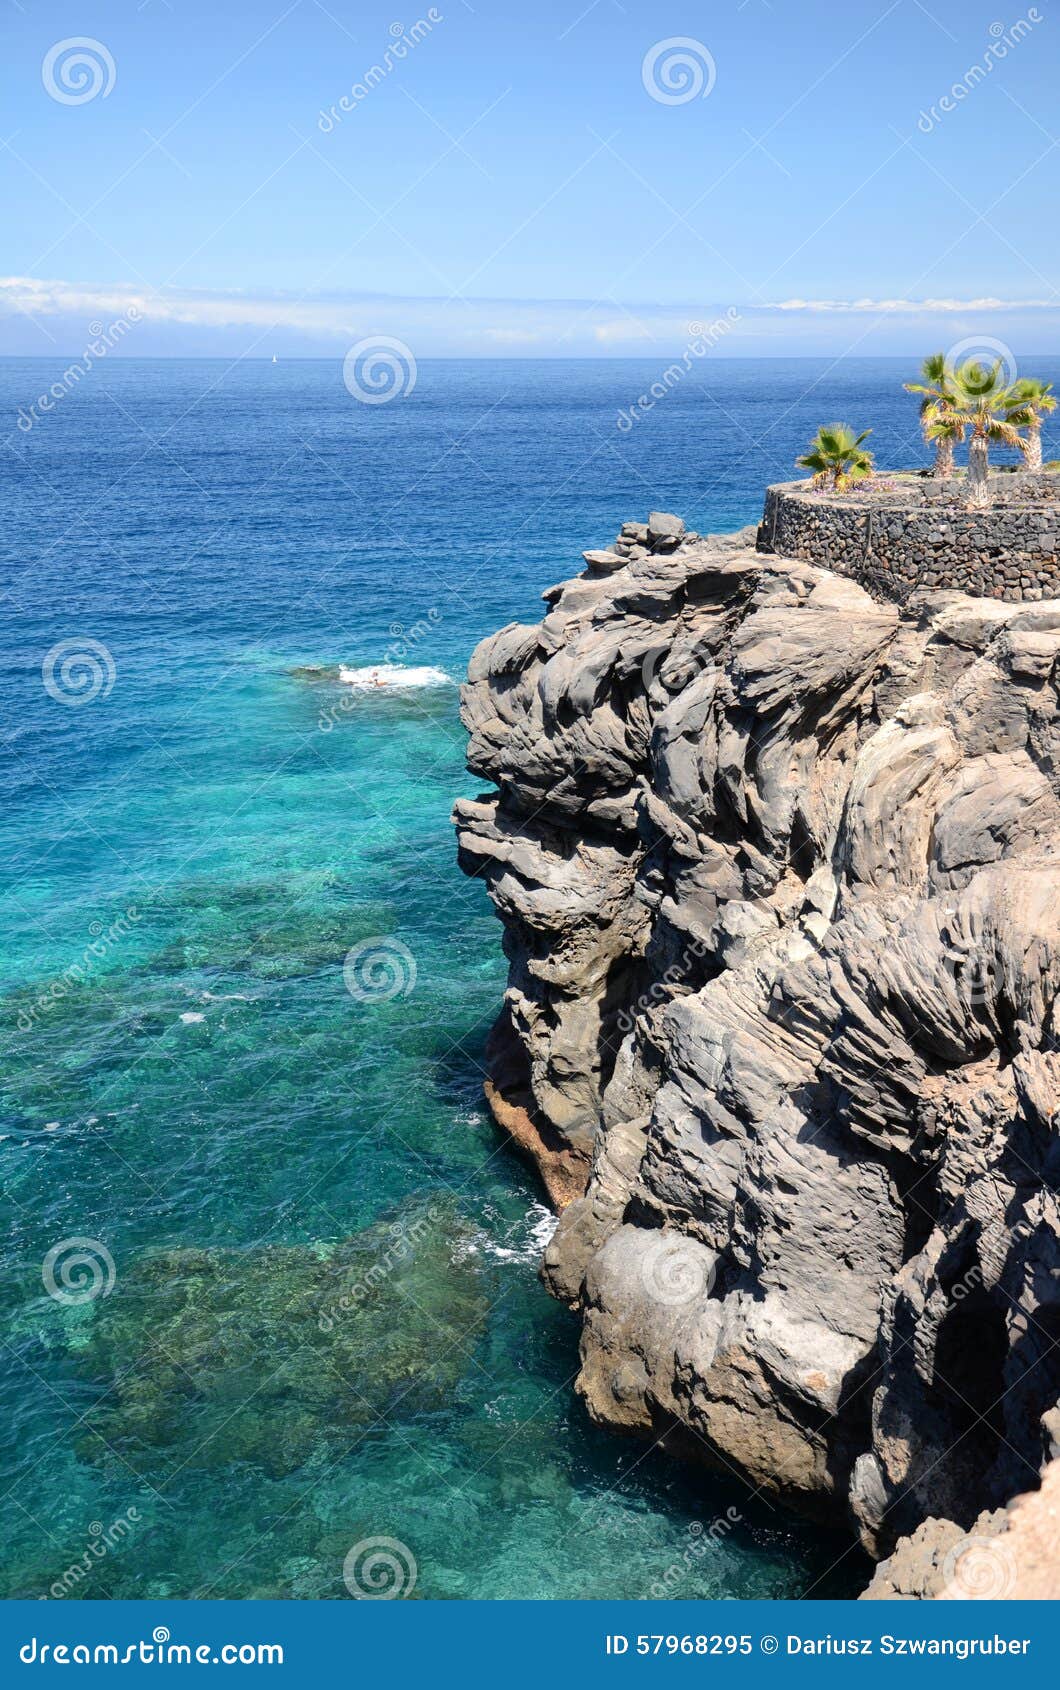 turquoise bay and volcanic cliffs in callao salvaje on tenerife